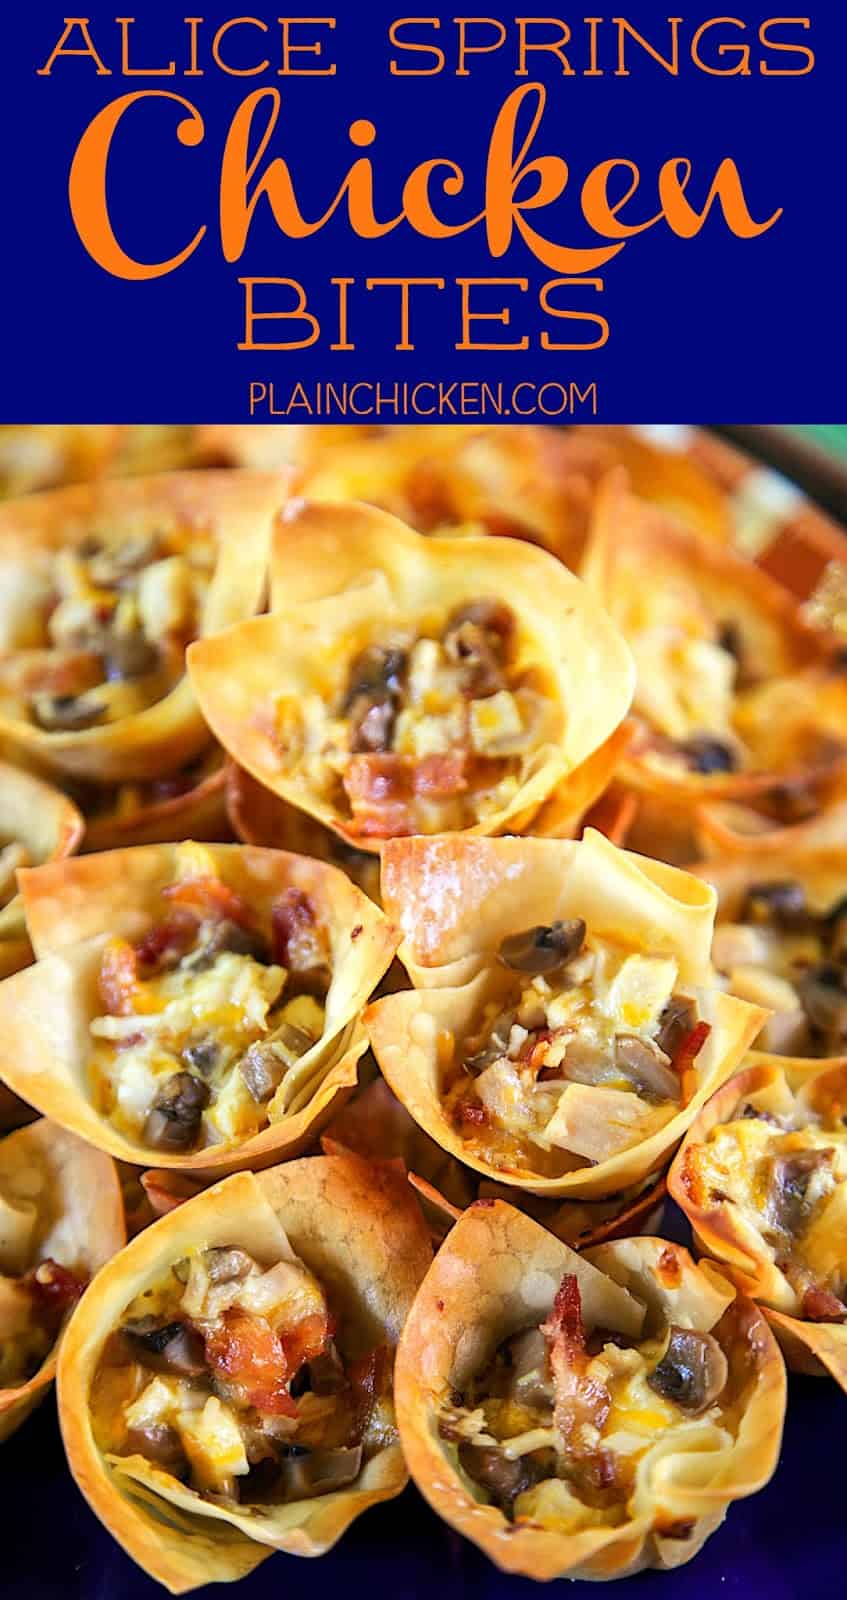 Alice Springs Chicken Bites - chicken, bacon, honey mustard, cheese and mushrooms baked in wonton wrappers. SO good! Can make ahead and bake later. Great for parties and tailgating. These are always the first thing to go!!